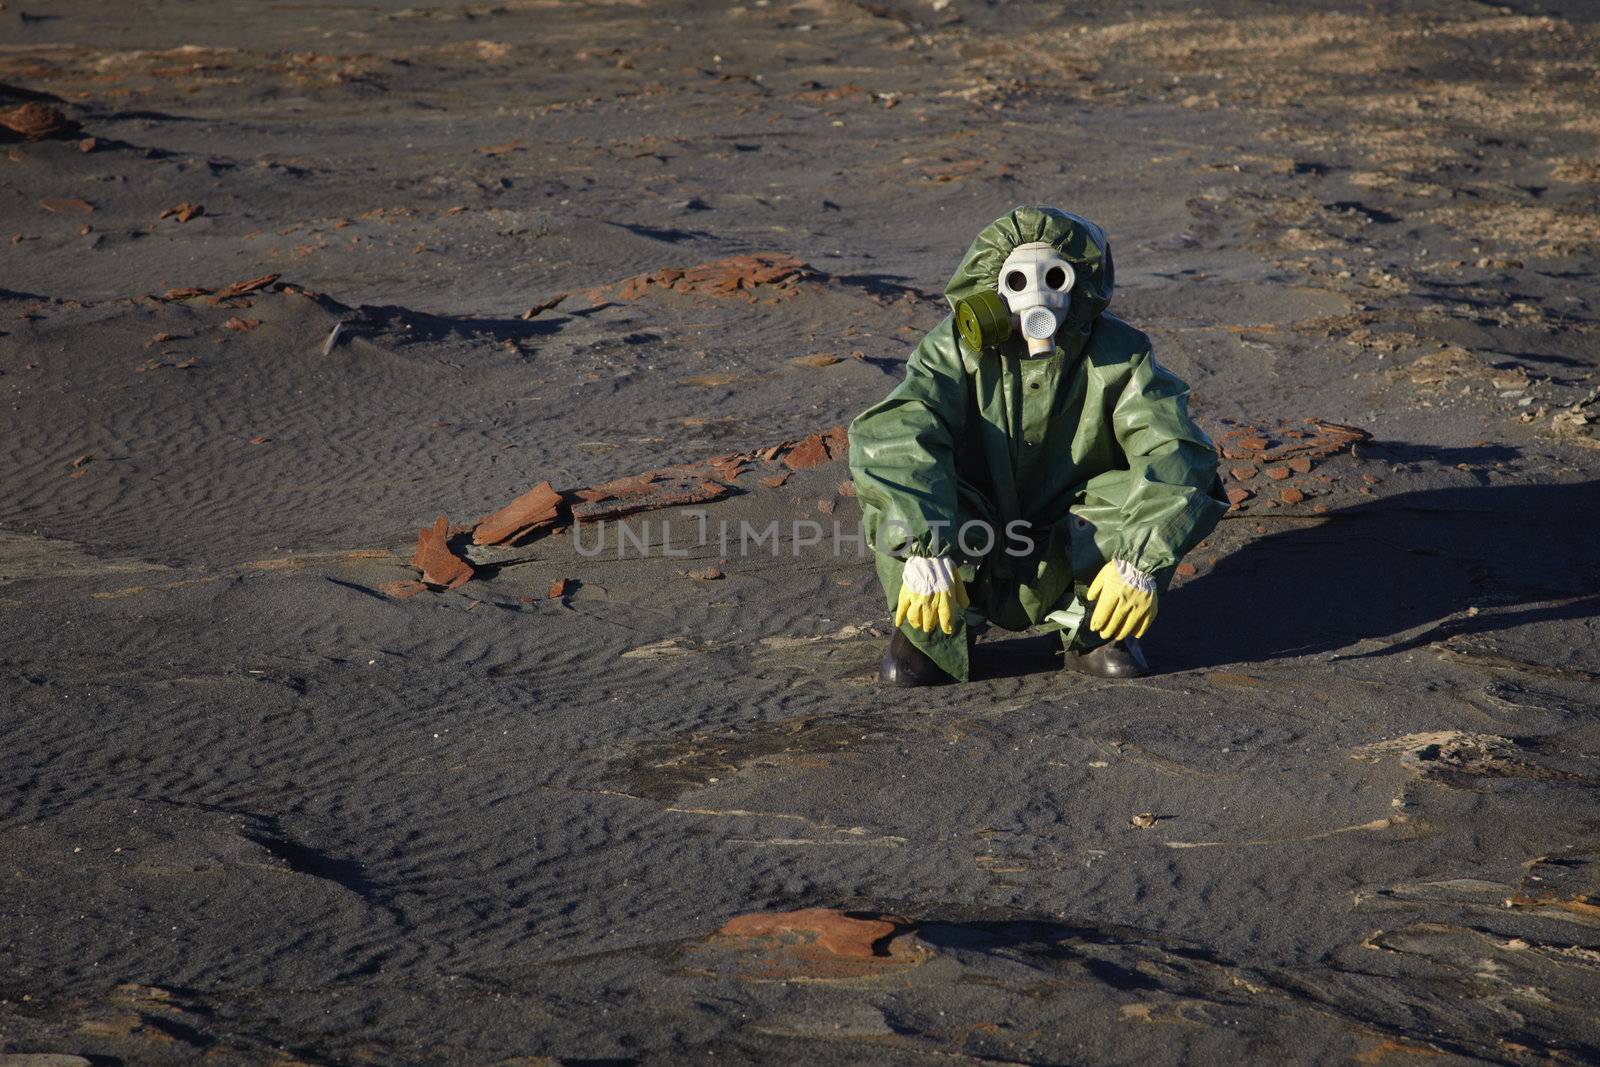 A man in protective clothing sitting in the desert